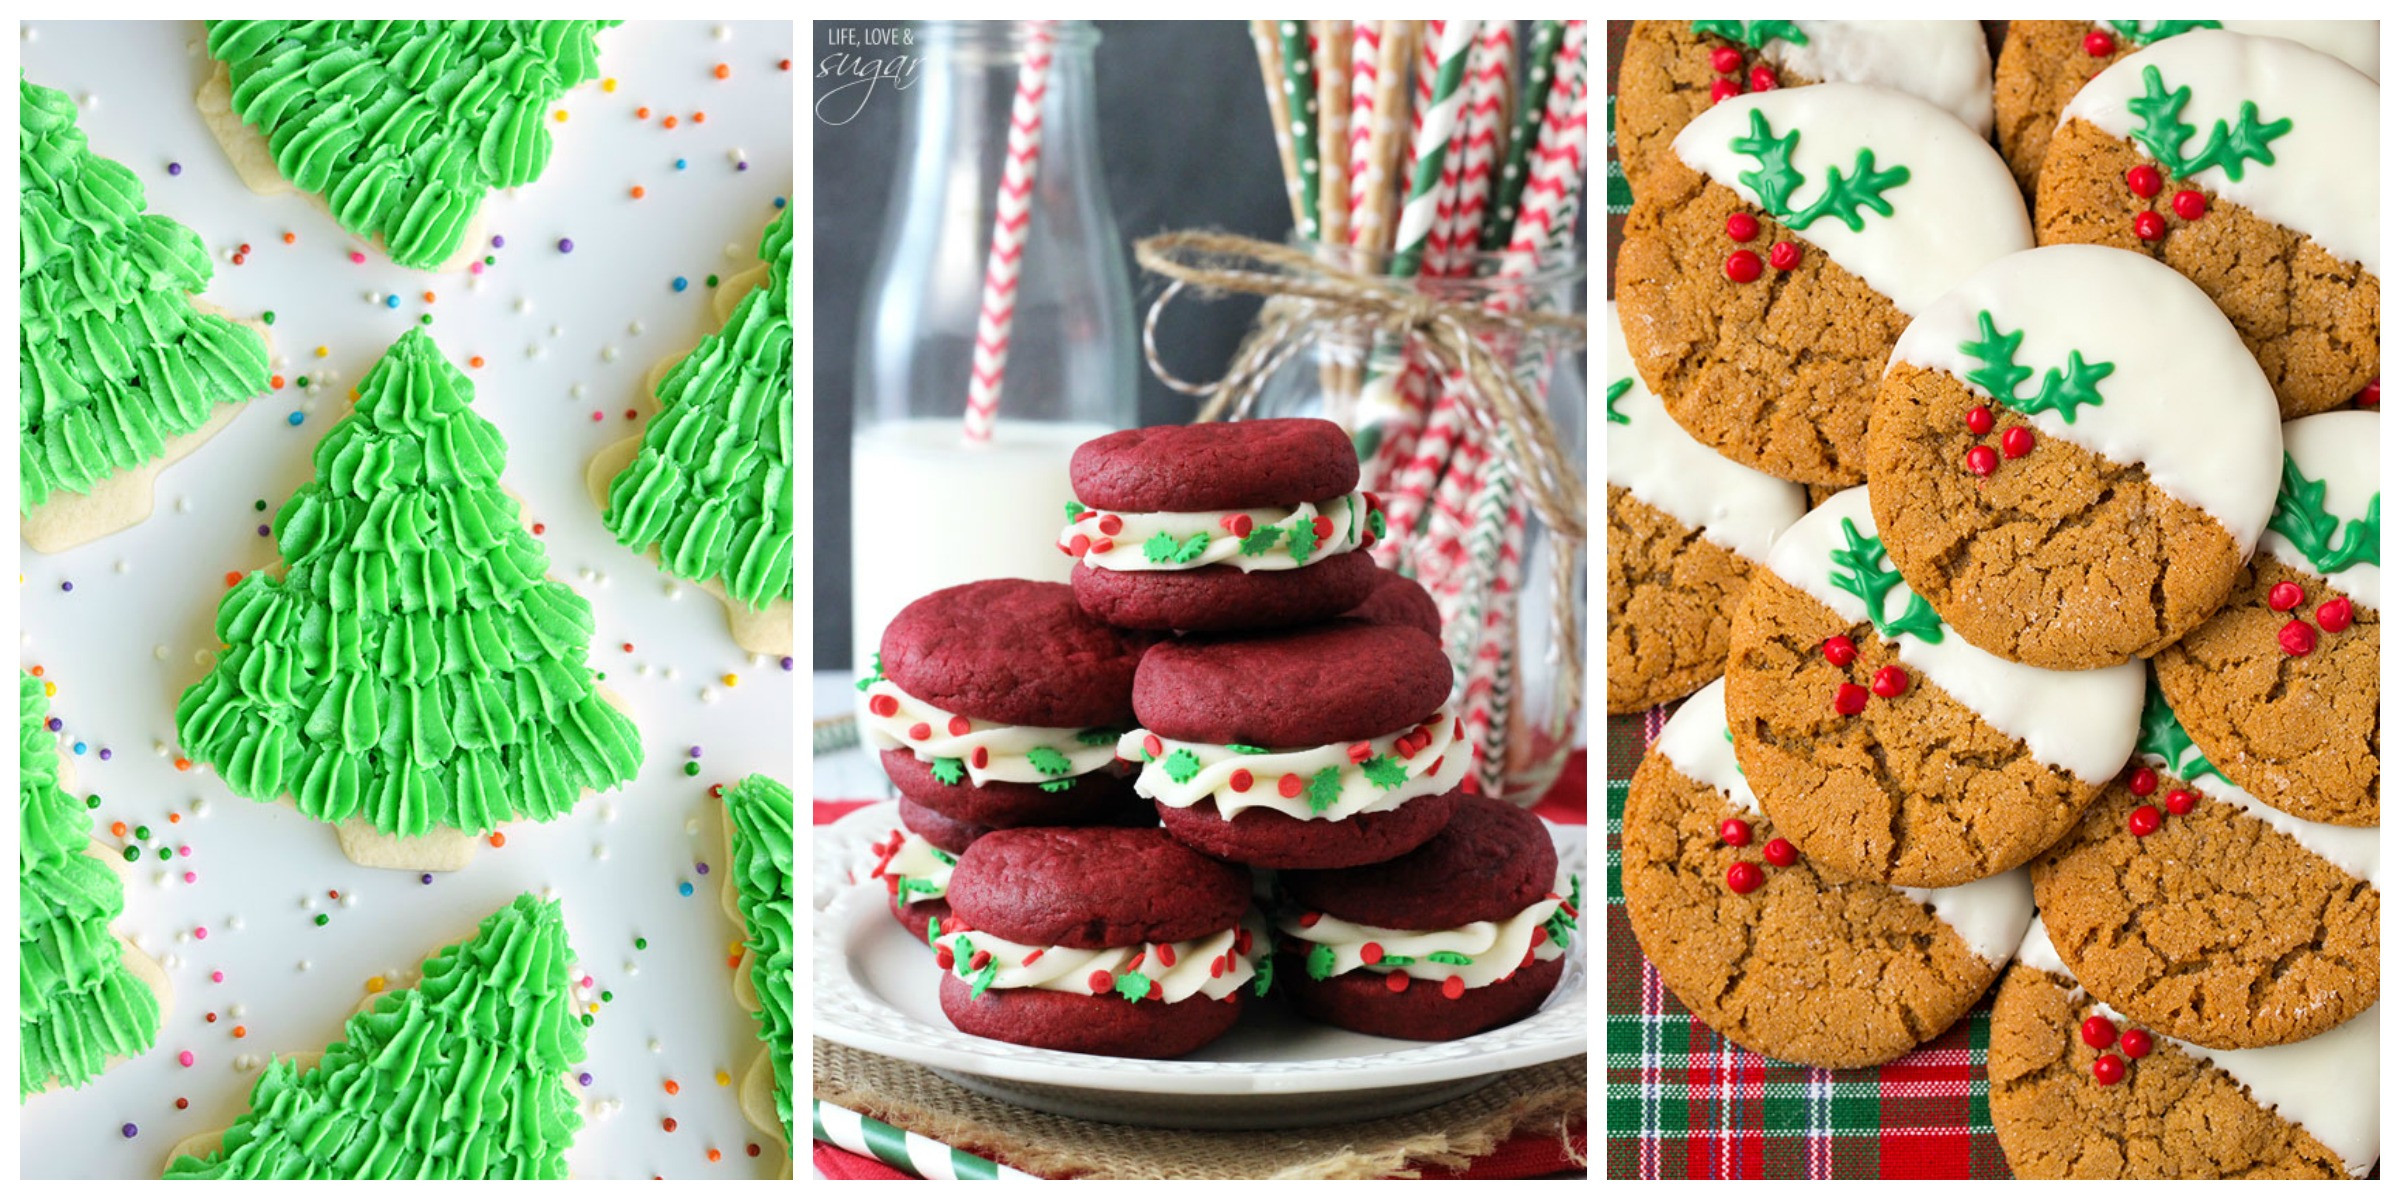 Fun Christmas Baking Ideas
 59 Easy Christmas Cookies Best Recipes for Holiday